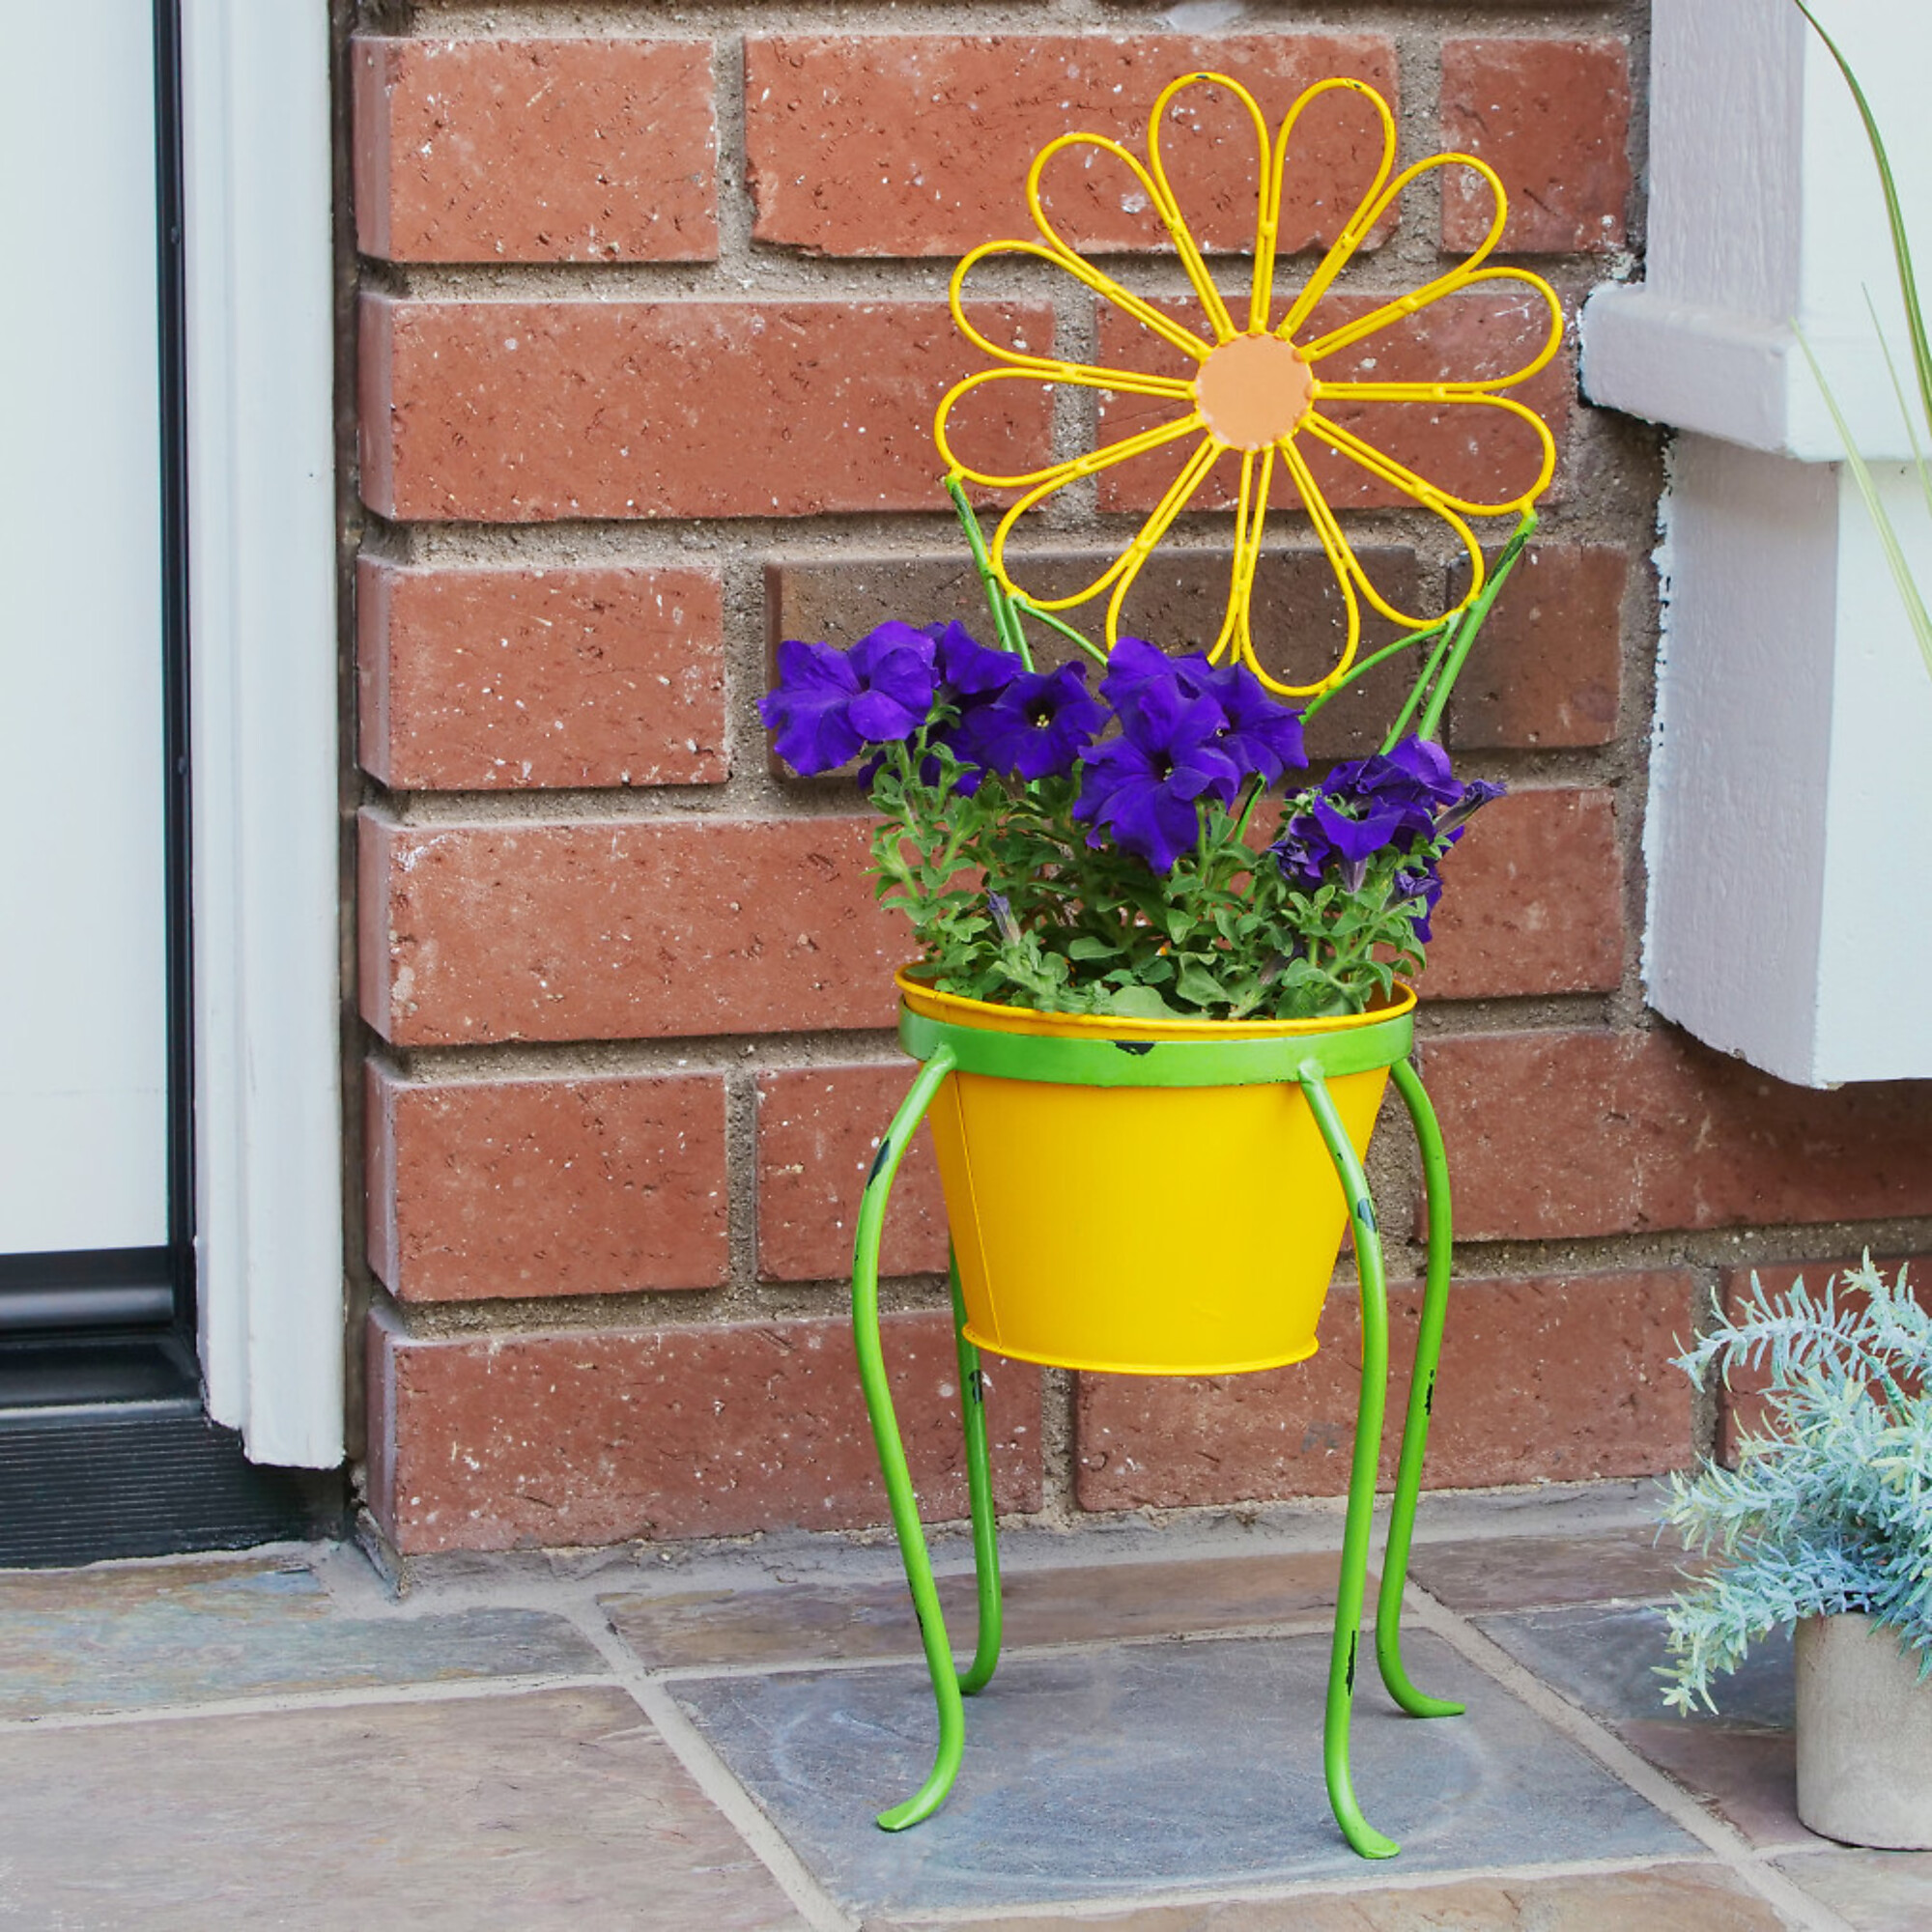 Alpine Corporation, Yellow Flower Planter, Container Length 9 in, Container Width 8 in, Material Metal, Model MAZ518YL